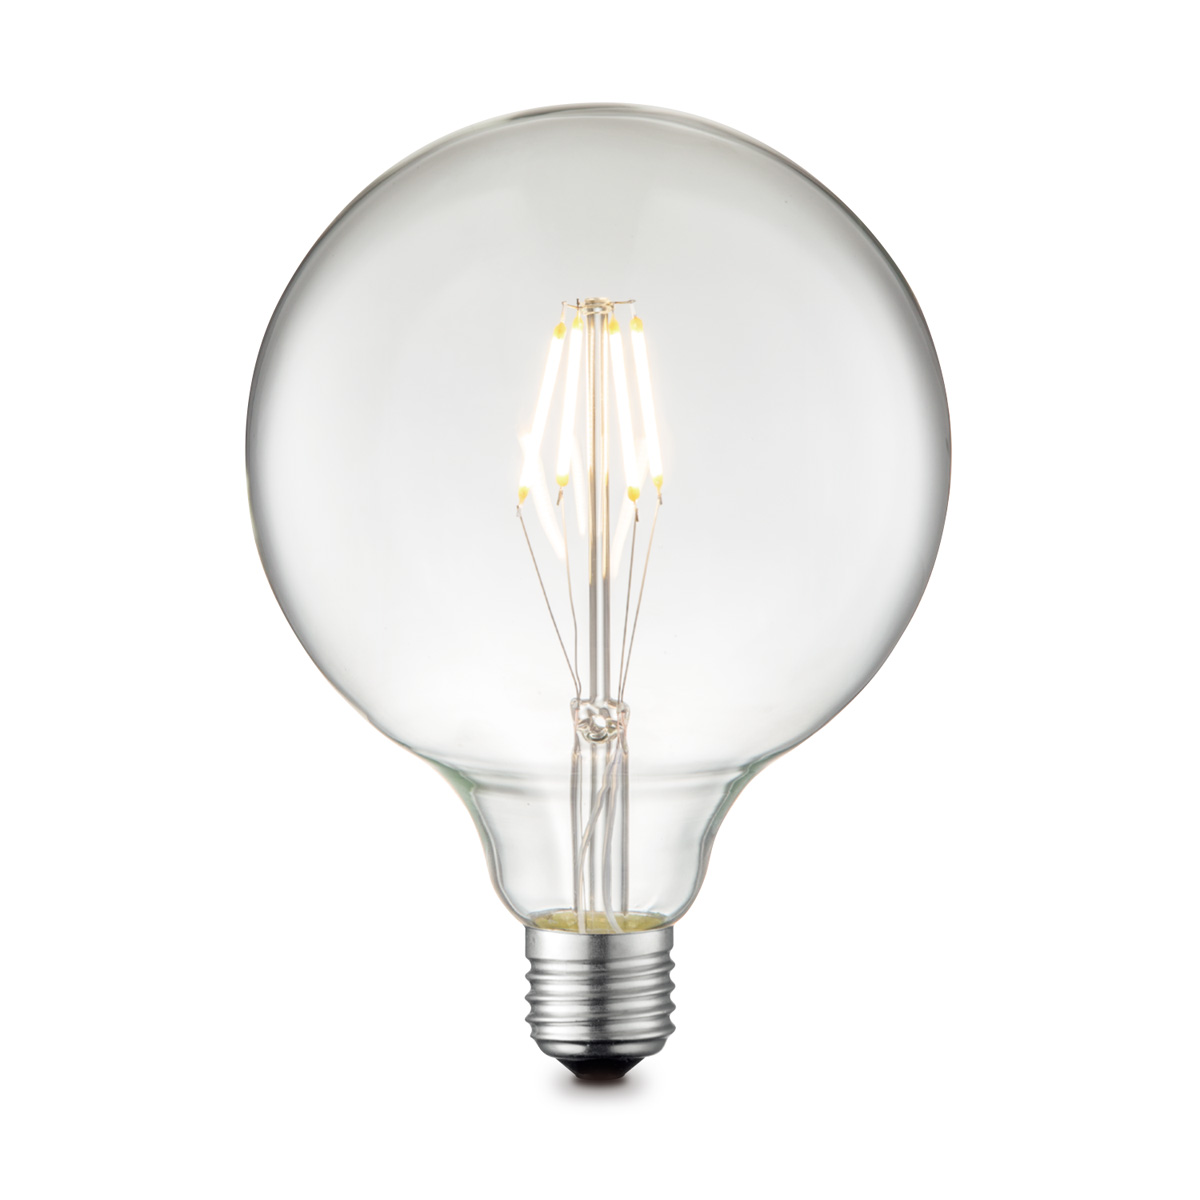 Tangla lighting - TLB-8005-02CL - LED Light Bulb Deco filament - G125 2W clear - non dimmable - E27